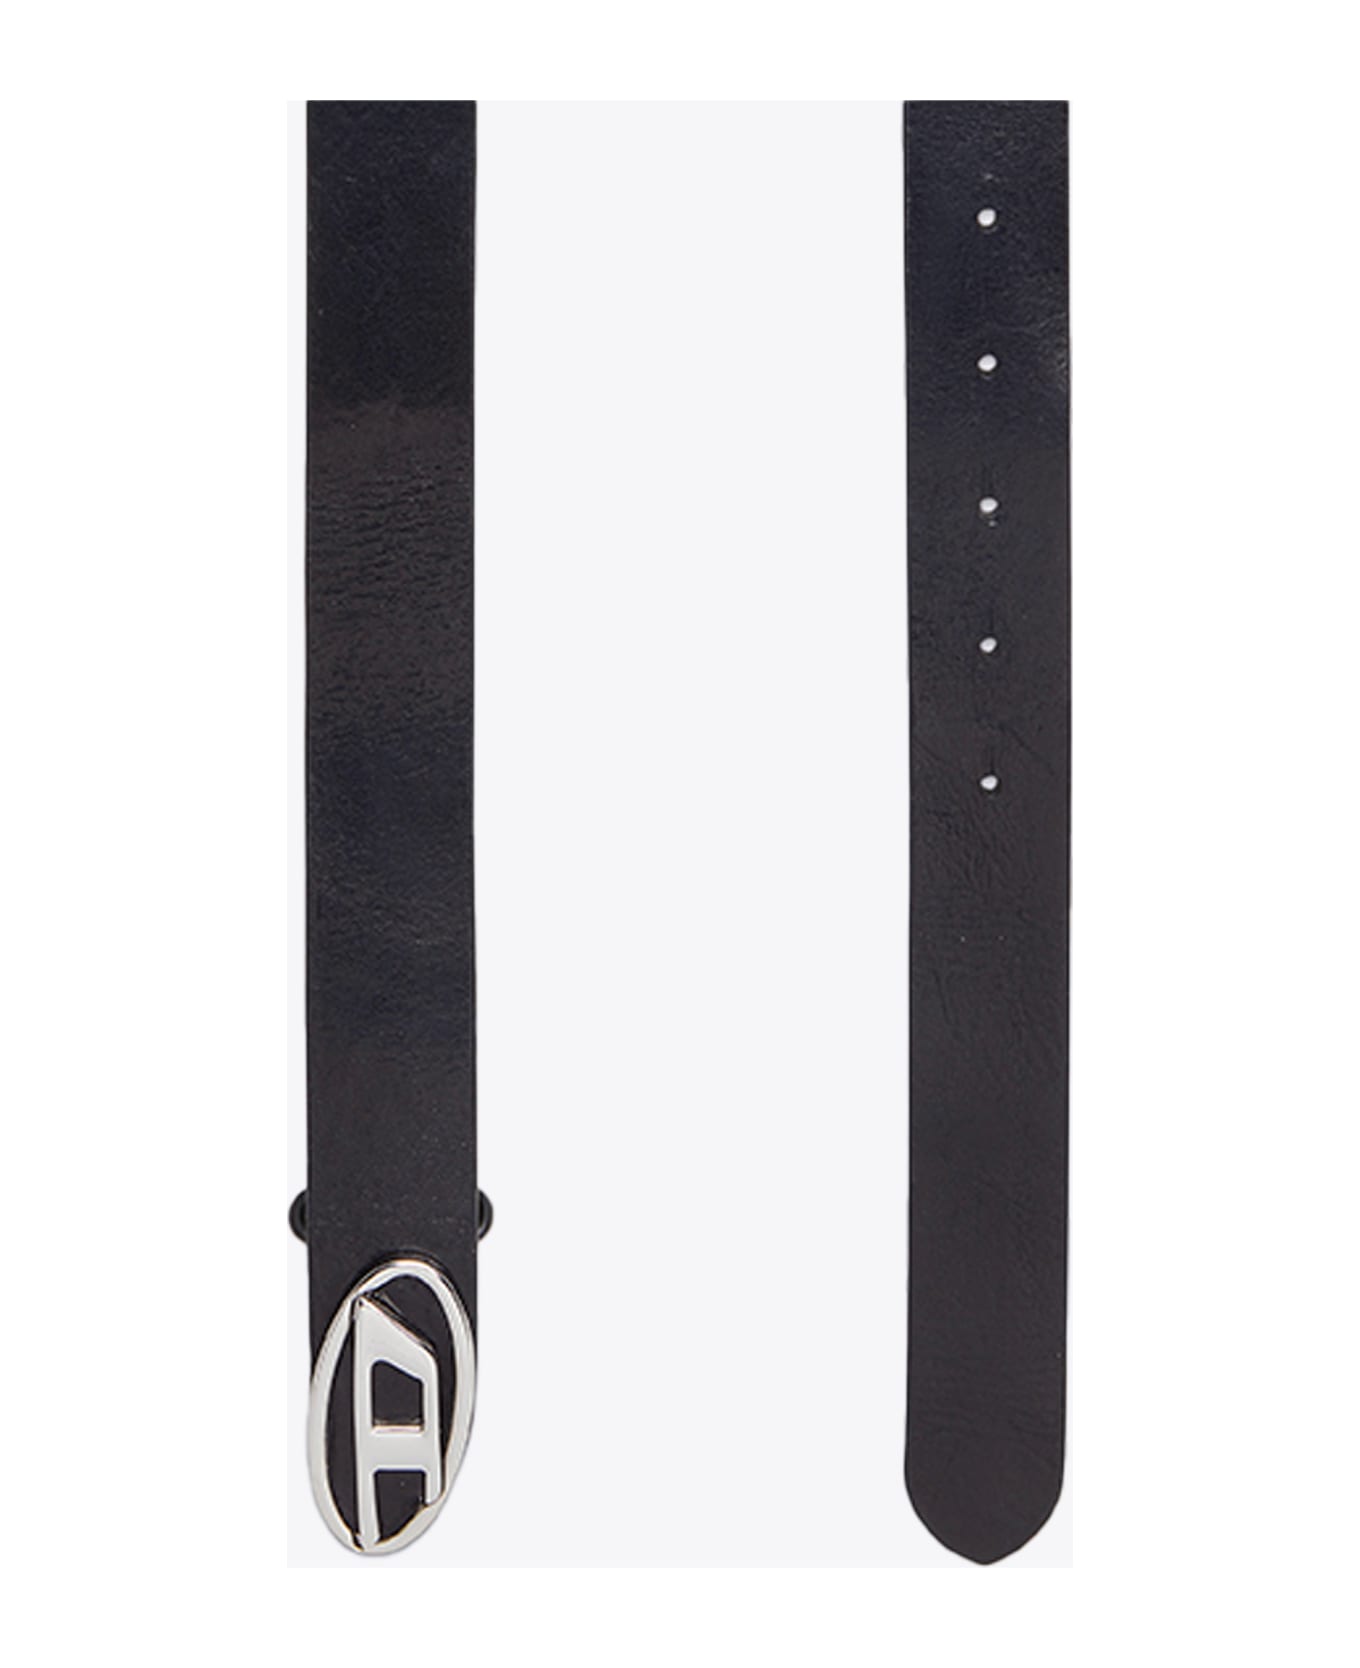 Diesel Oval D Logo B-1dr-layer Mat black and shiny black leather reversible belt - B-1dr Layer - Nero